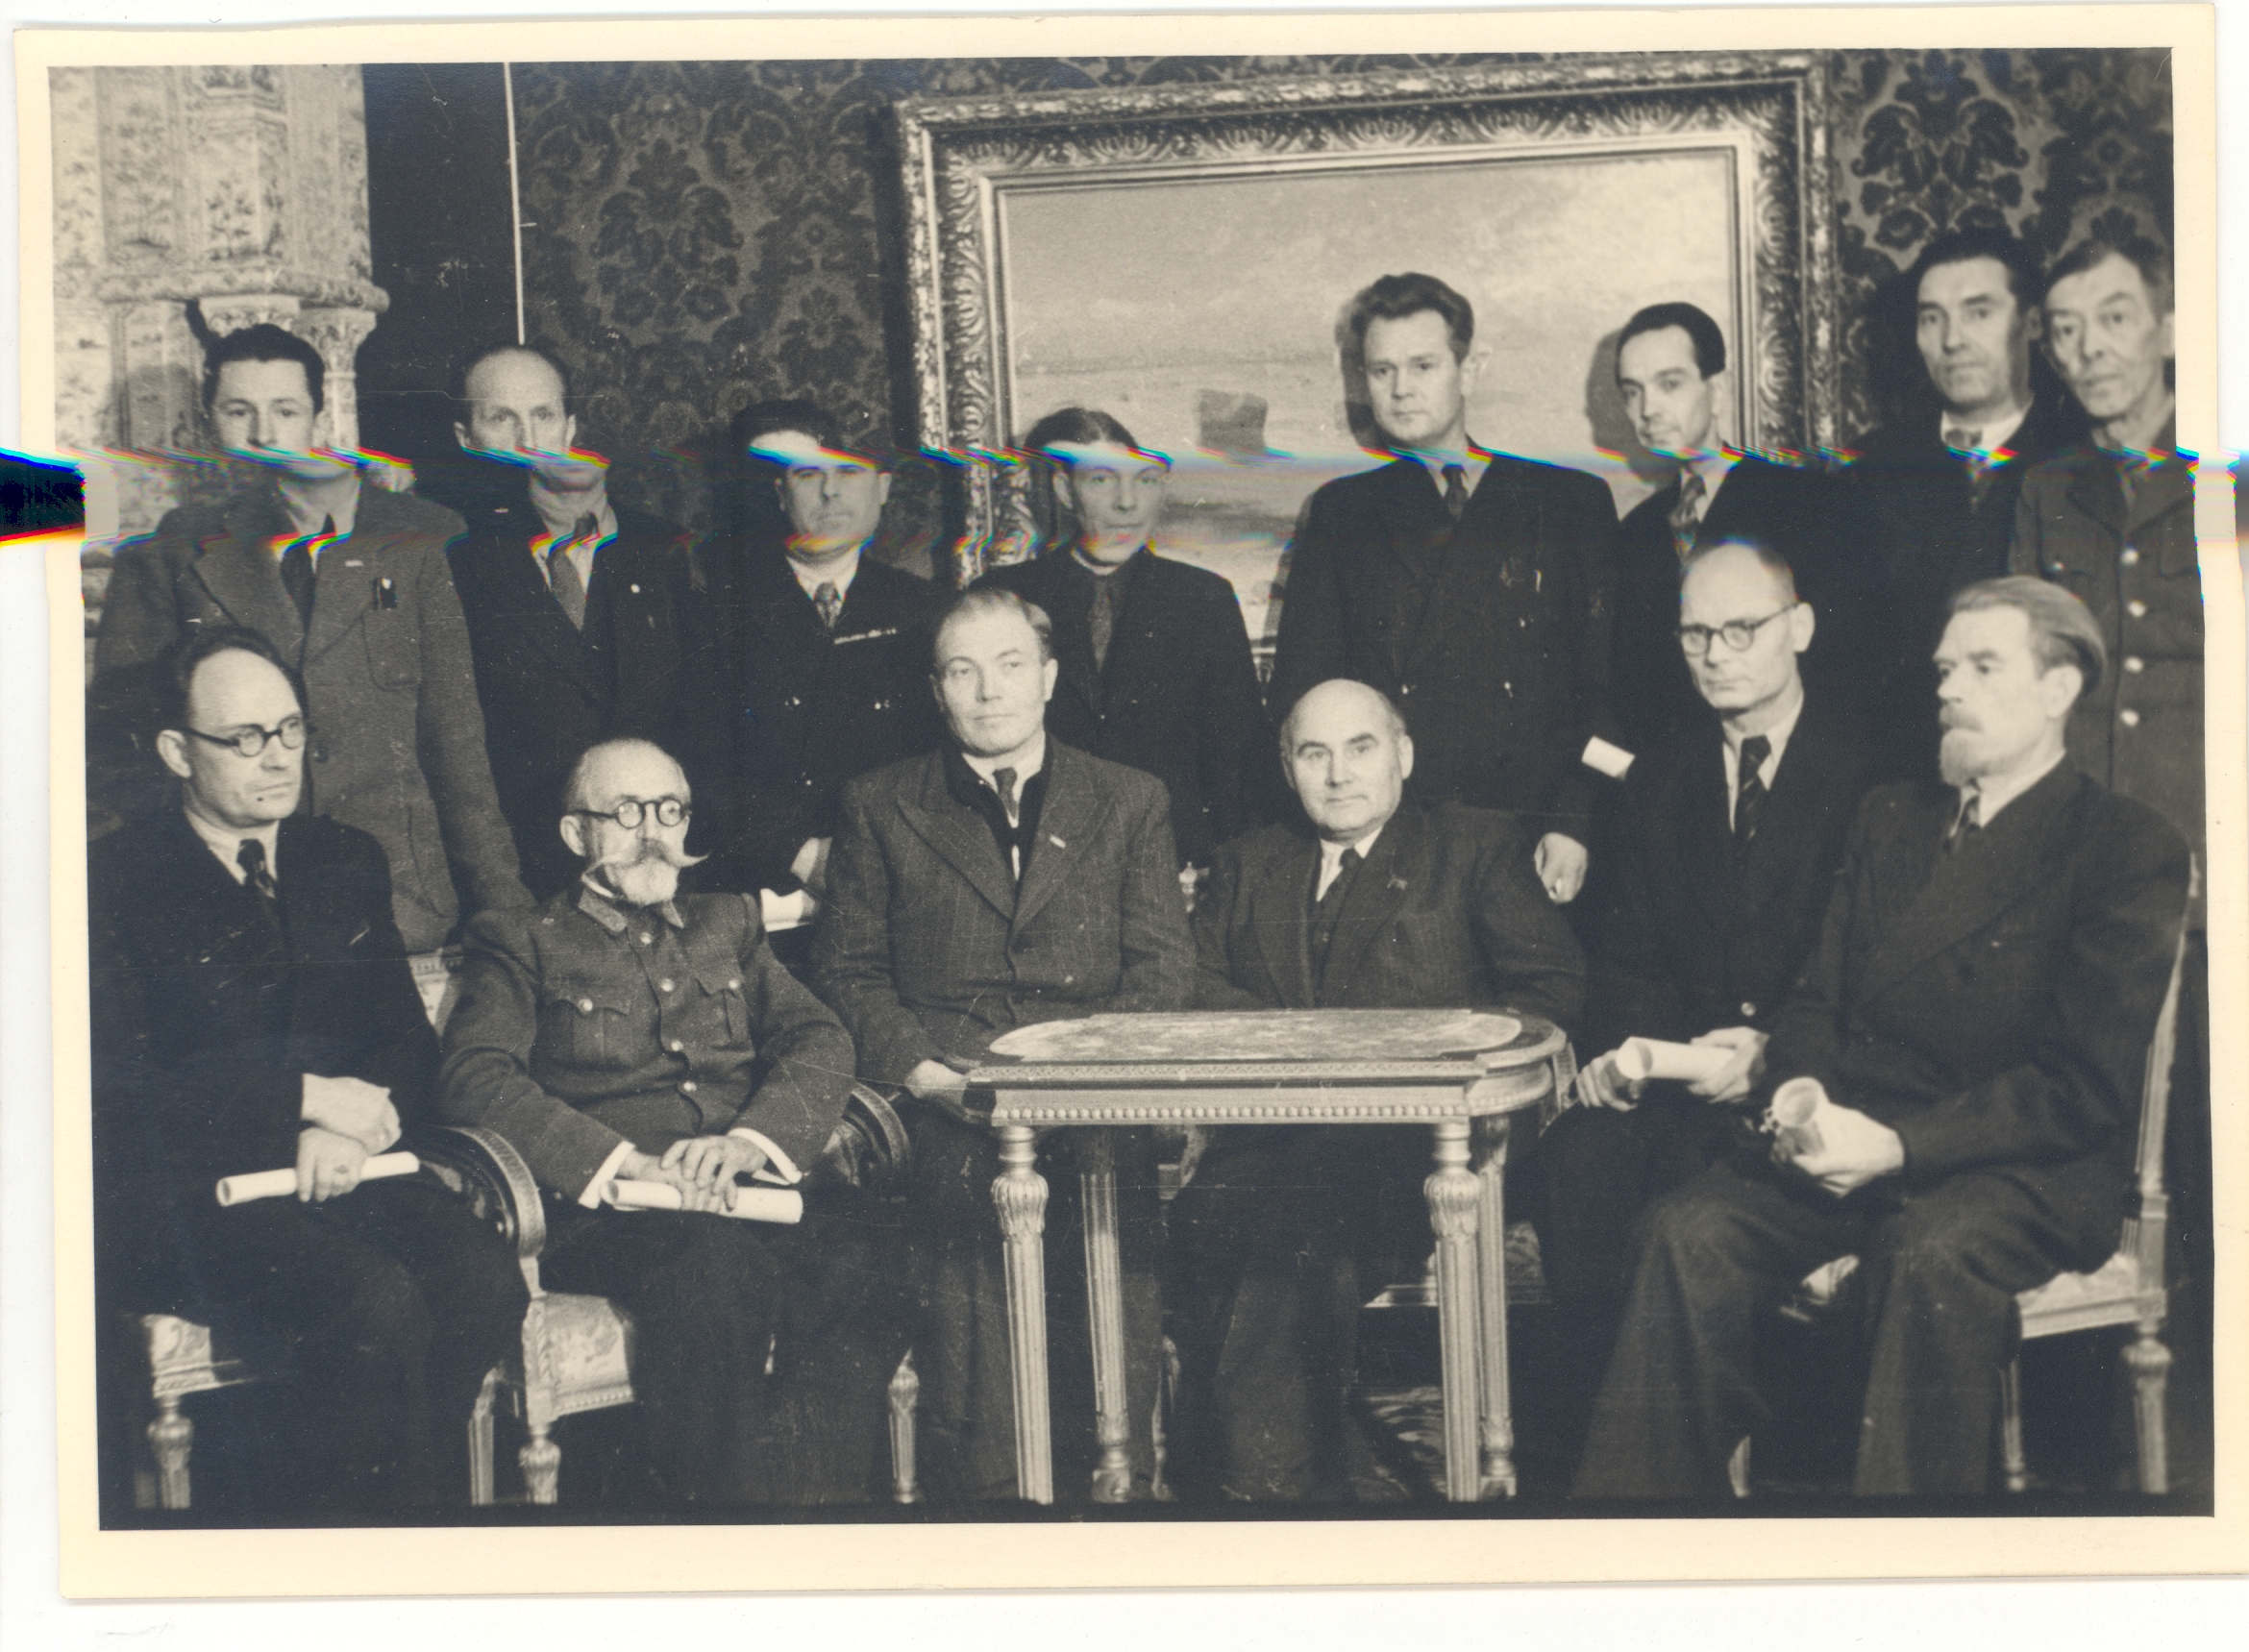 J. Vares-Barbarus with the recipients of praise letters in Kadrioru Castle 18.10.1945